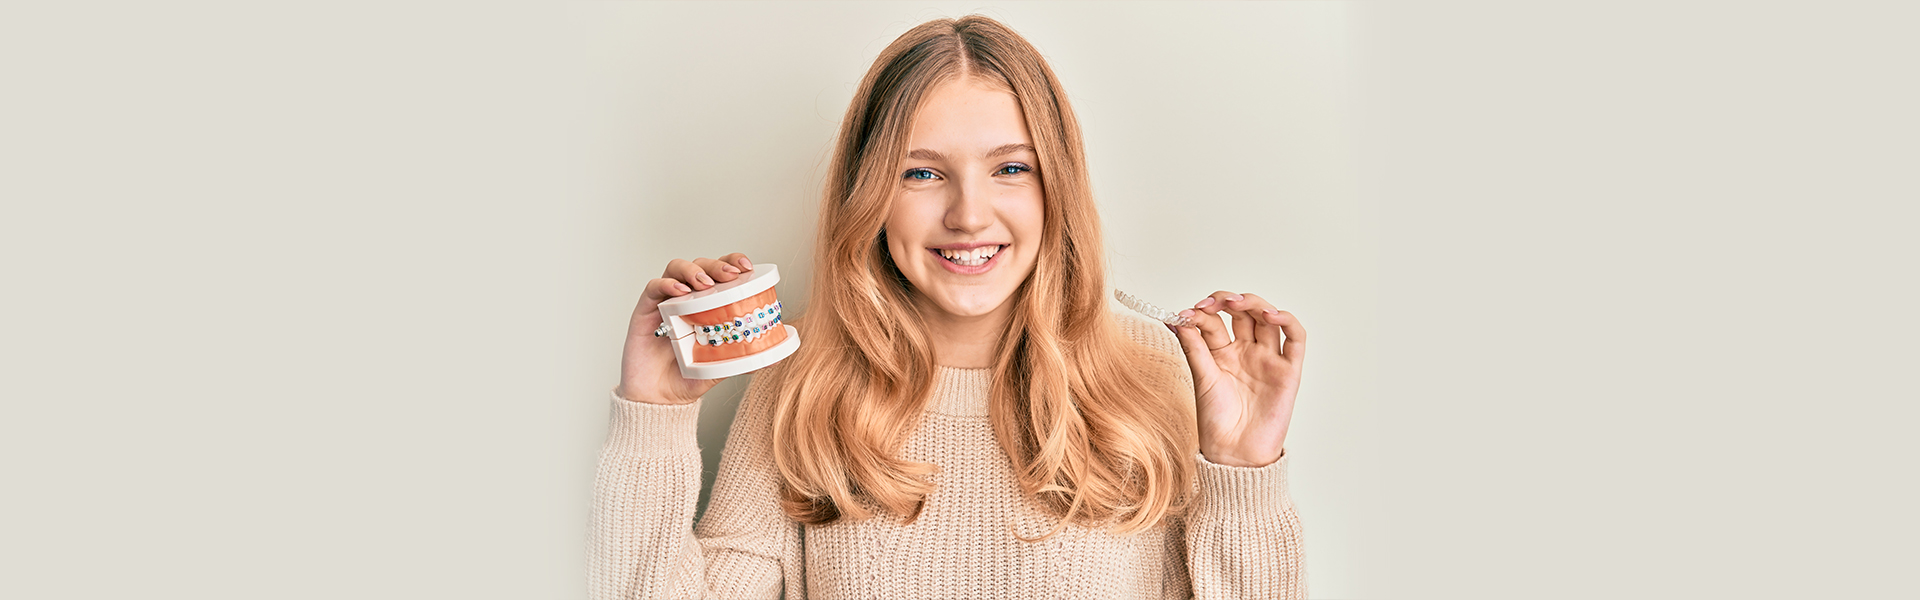 Clear Aligners Vs. Braces: Which Is the Most Ideal for You?